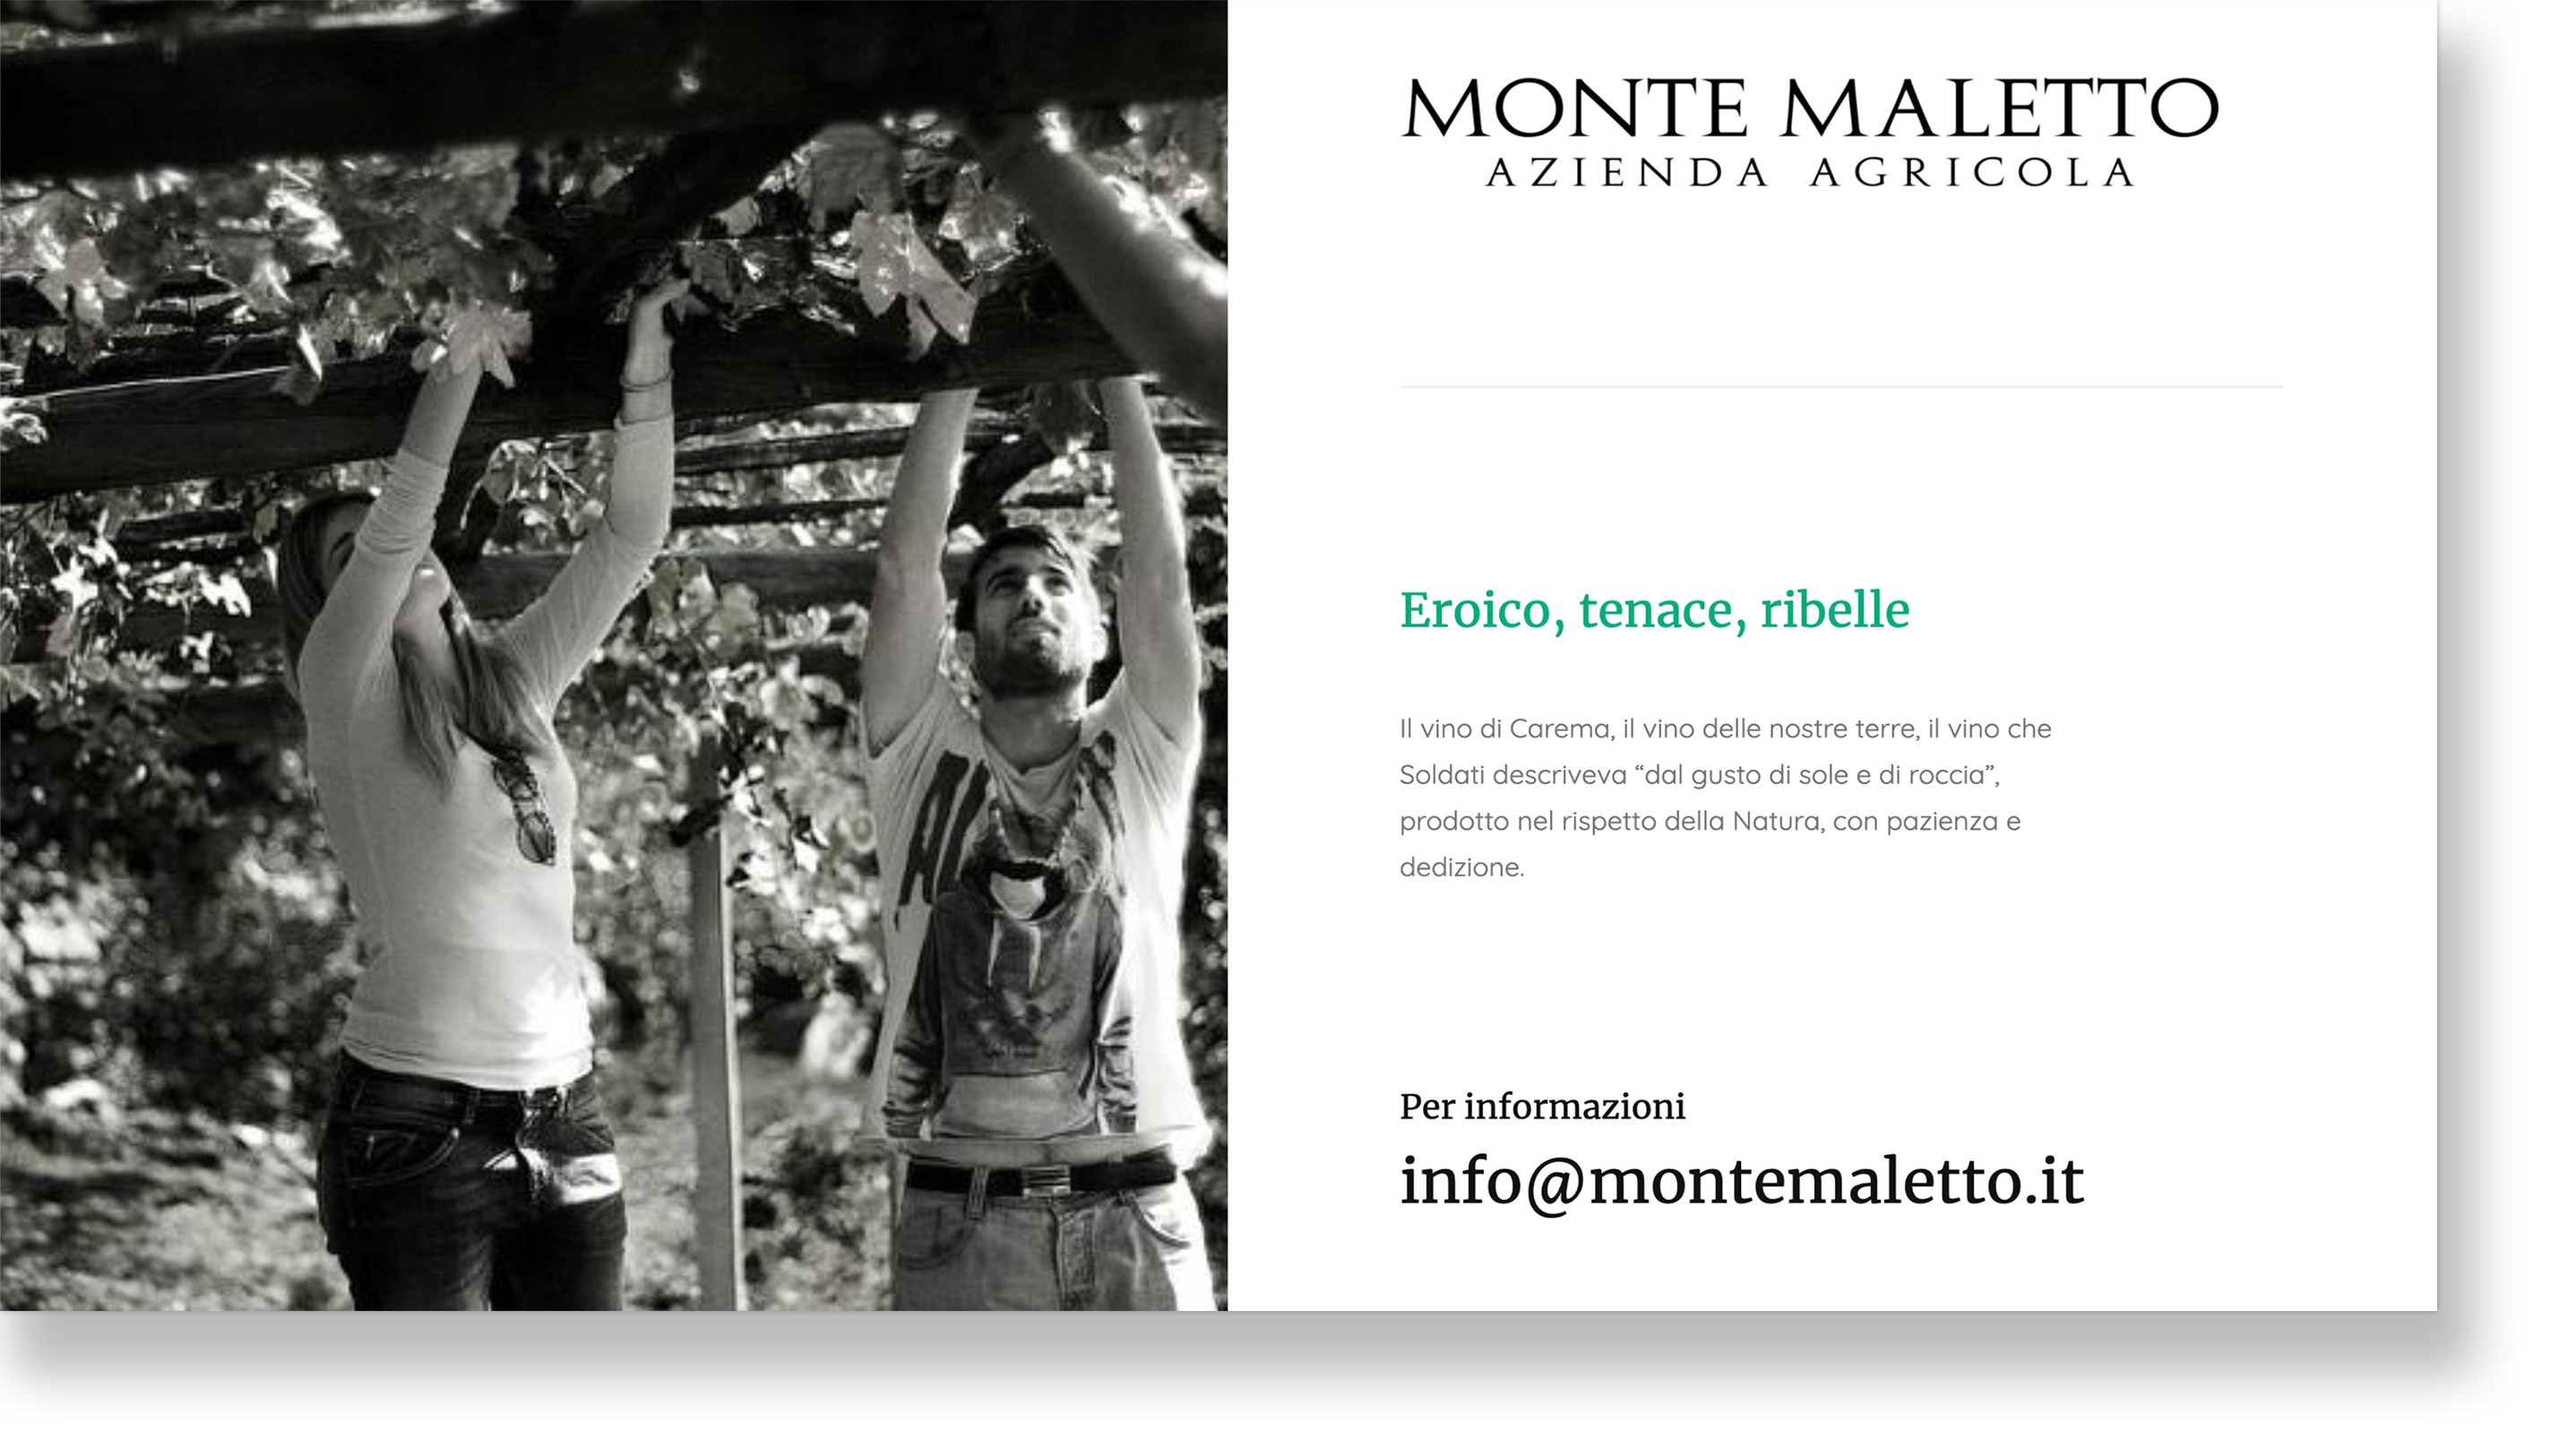 Monte Maletto winery, founded 2014.